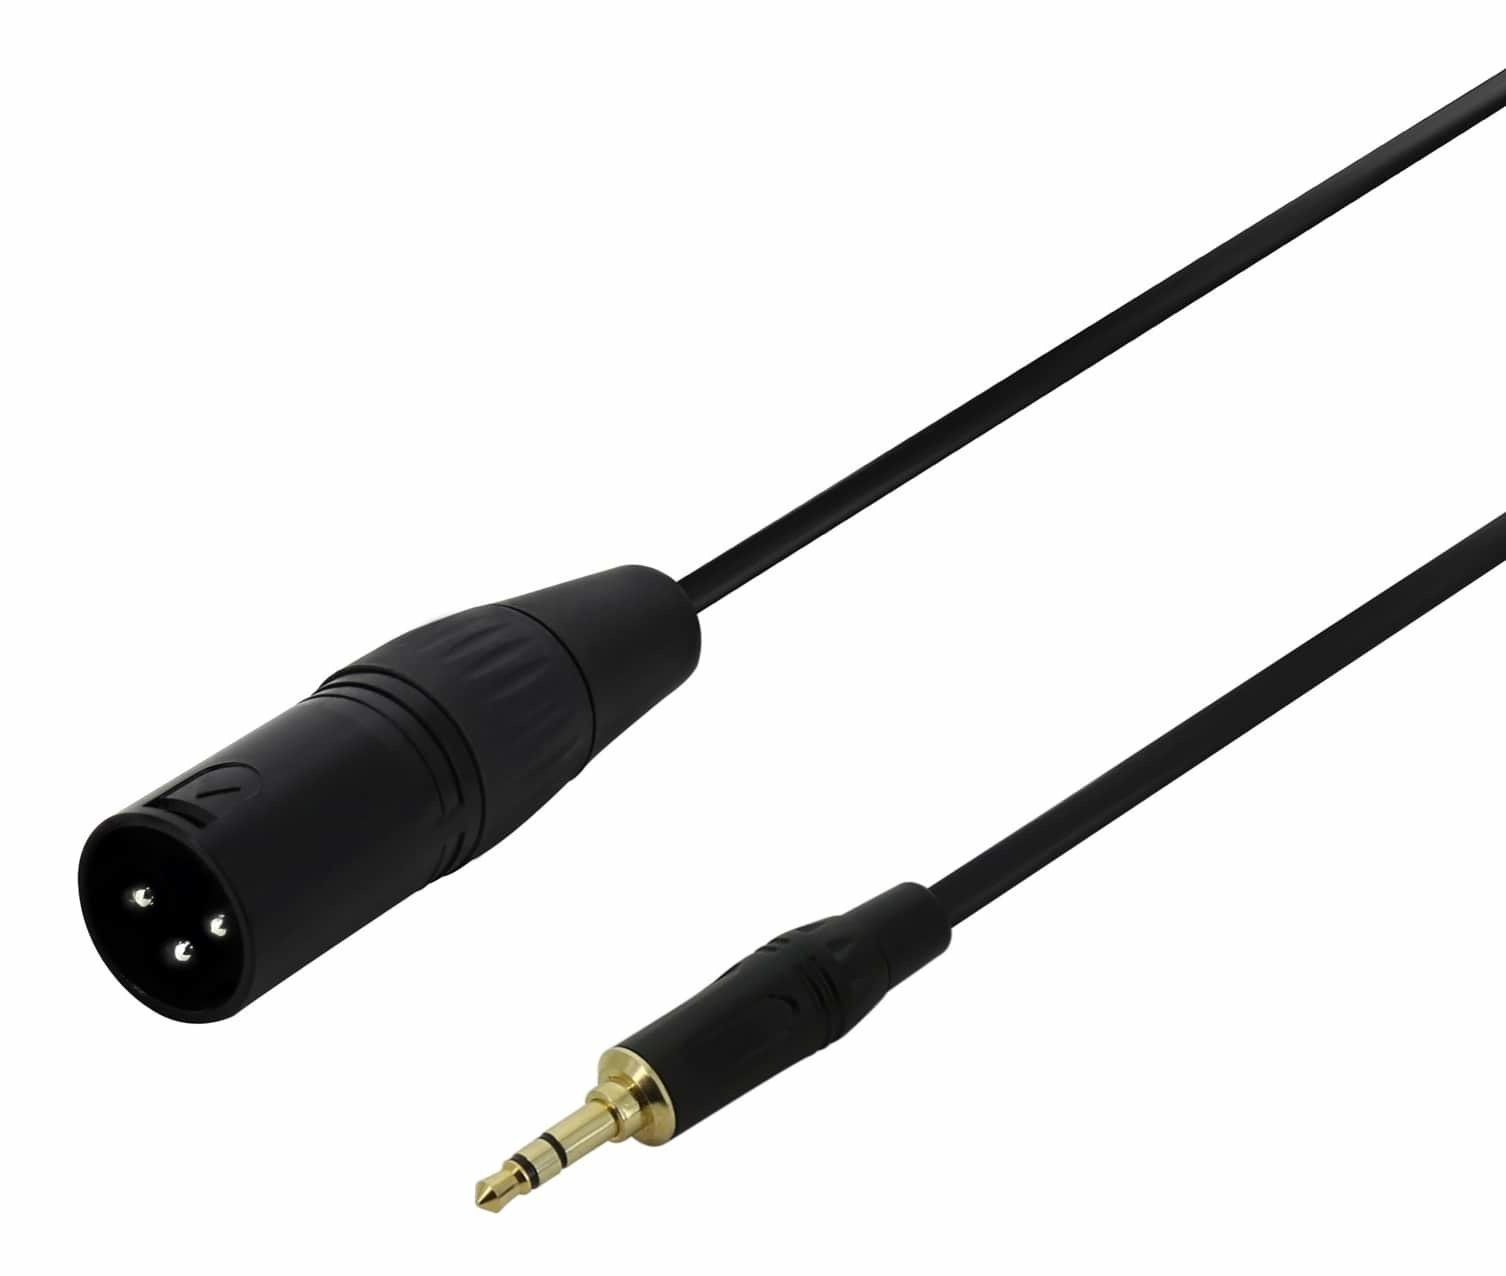 3.5mm TRRS Stereo Audio & Microphone Cable Male to Male